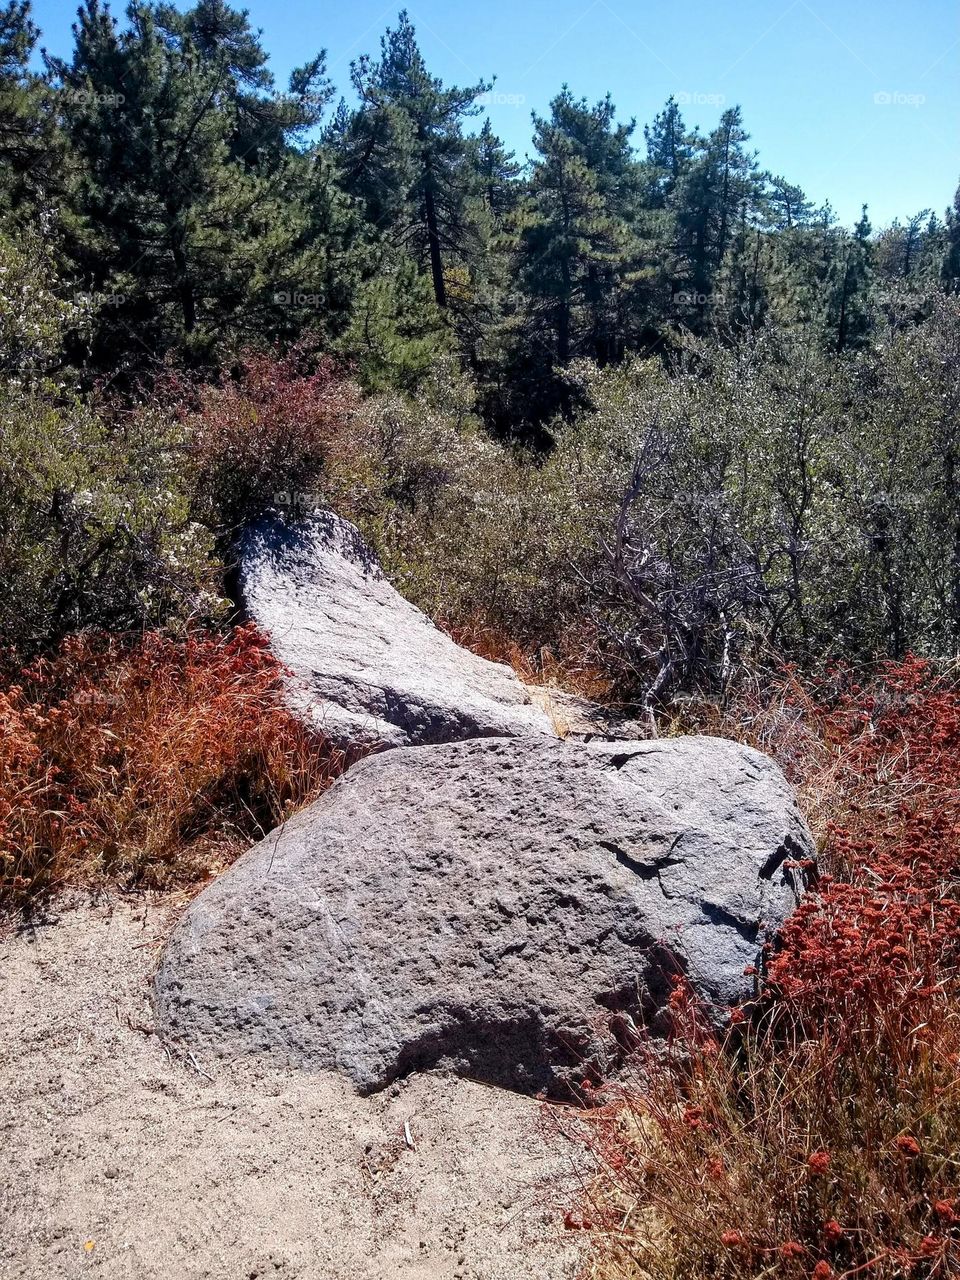 Granite boulders and forested slopes in the Cuyamaca Rancho State Park, San Diego County, California.